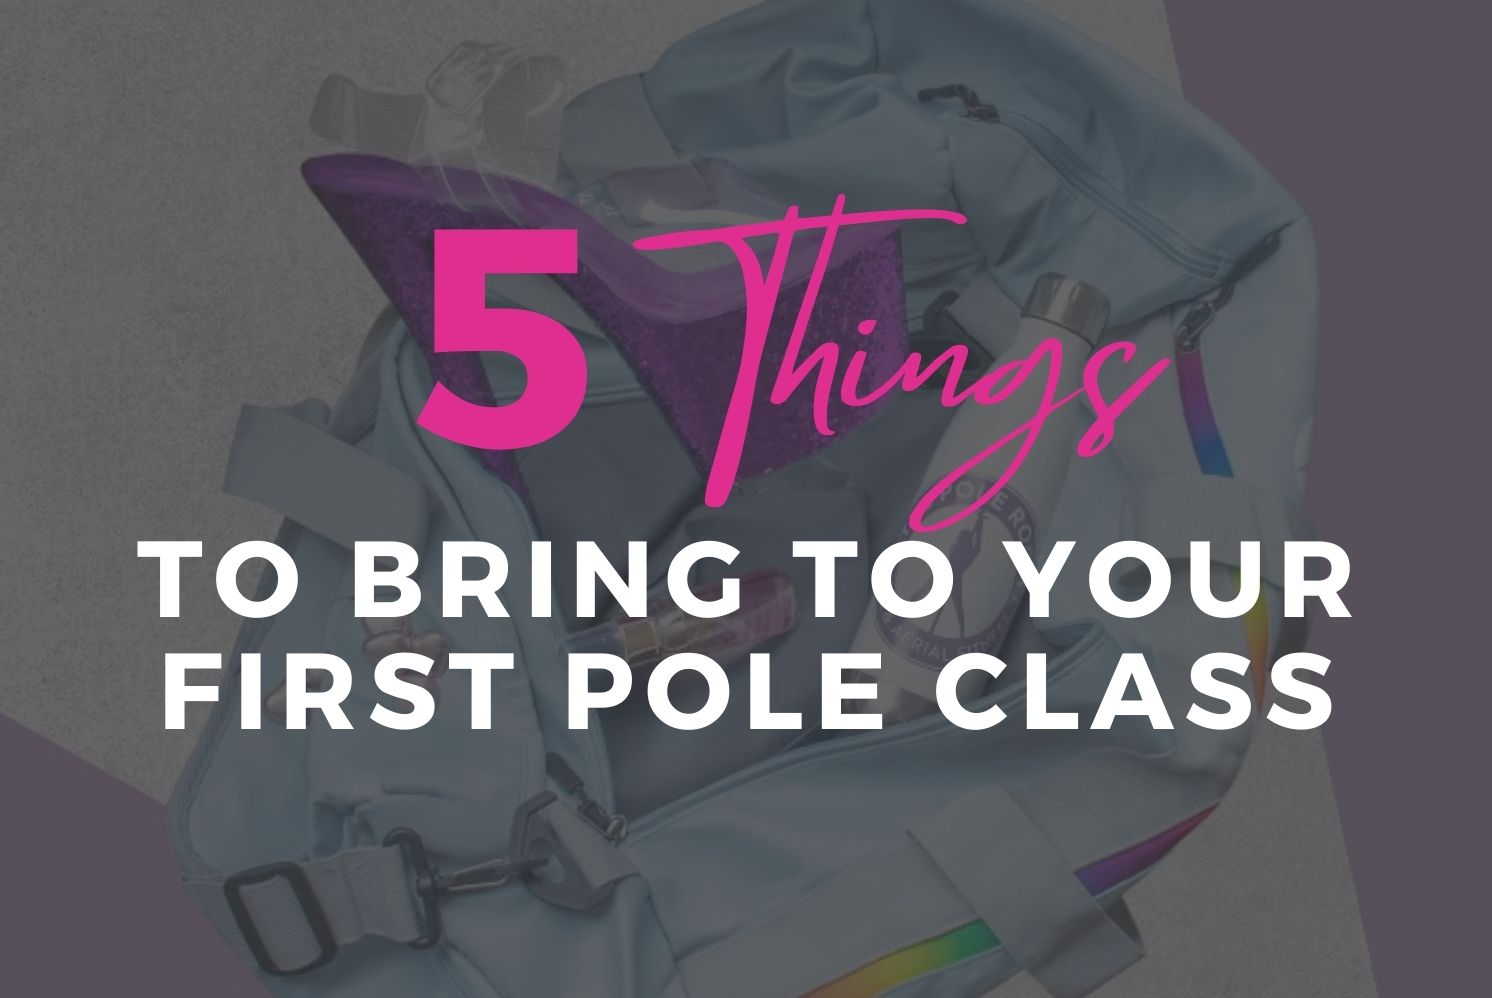 First Pole Dance Class What to Bring